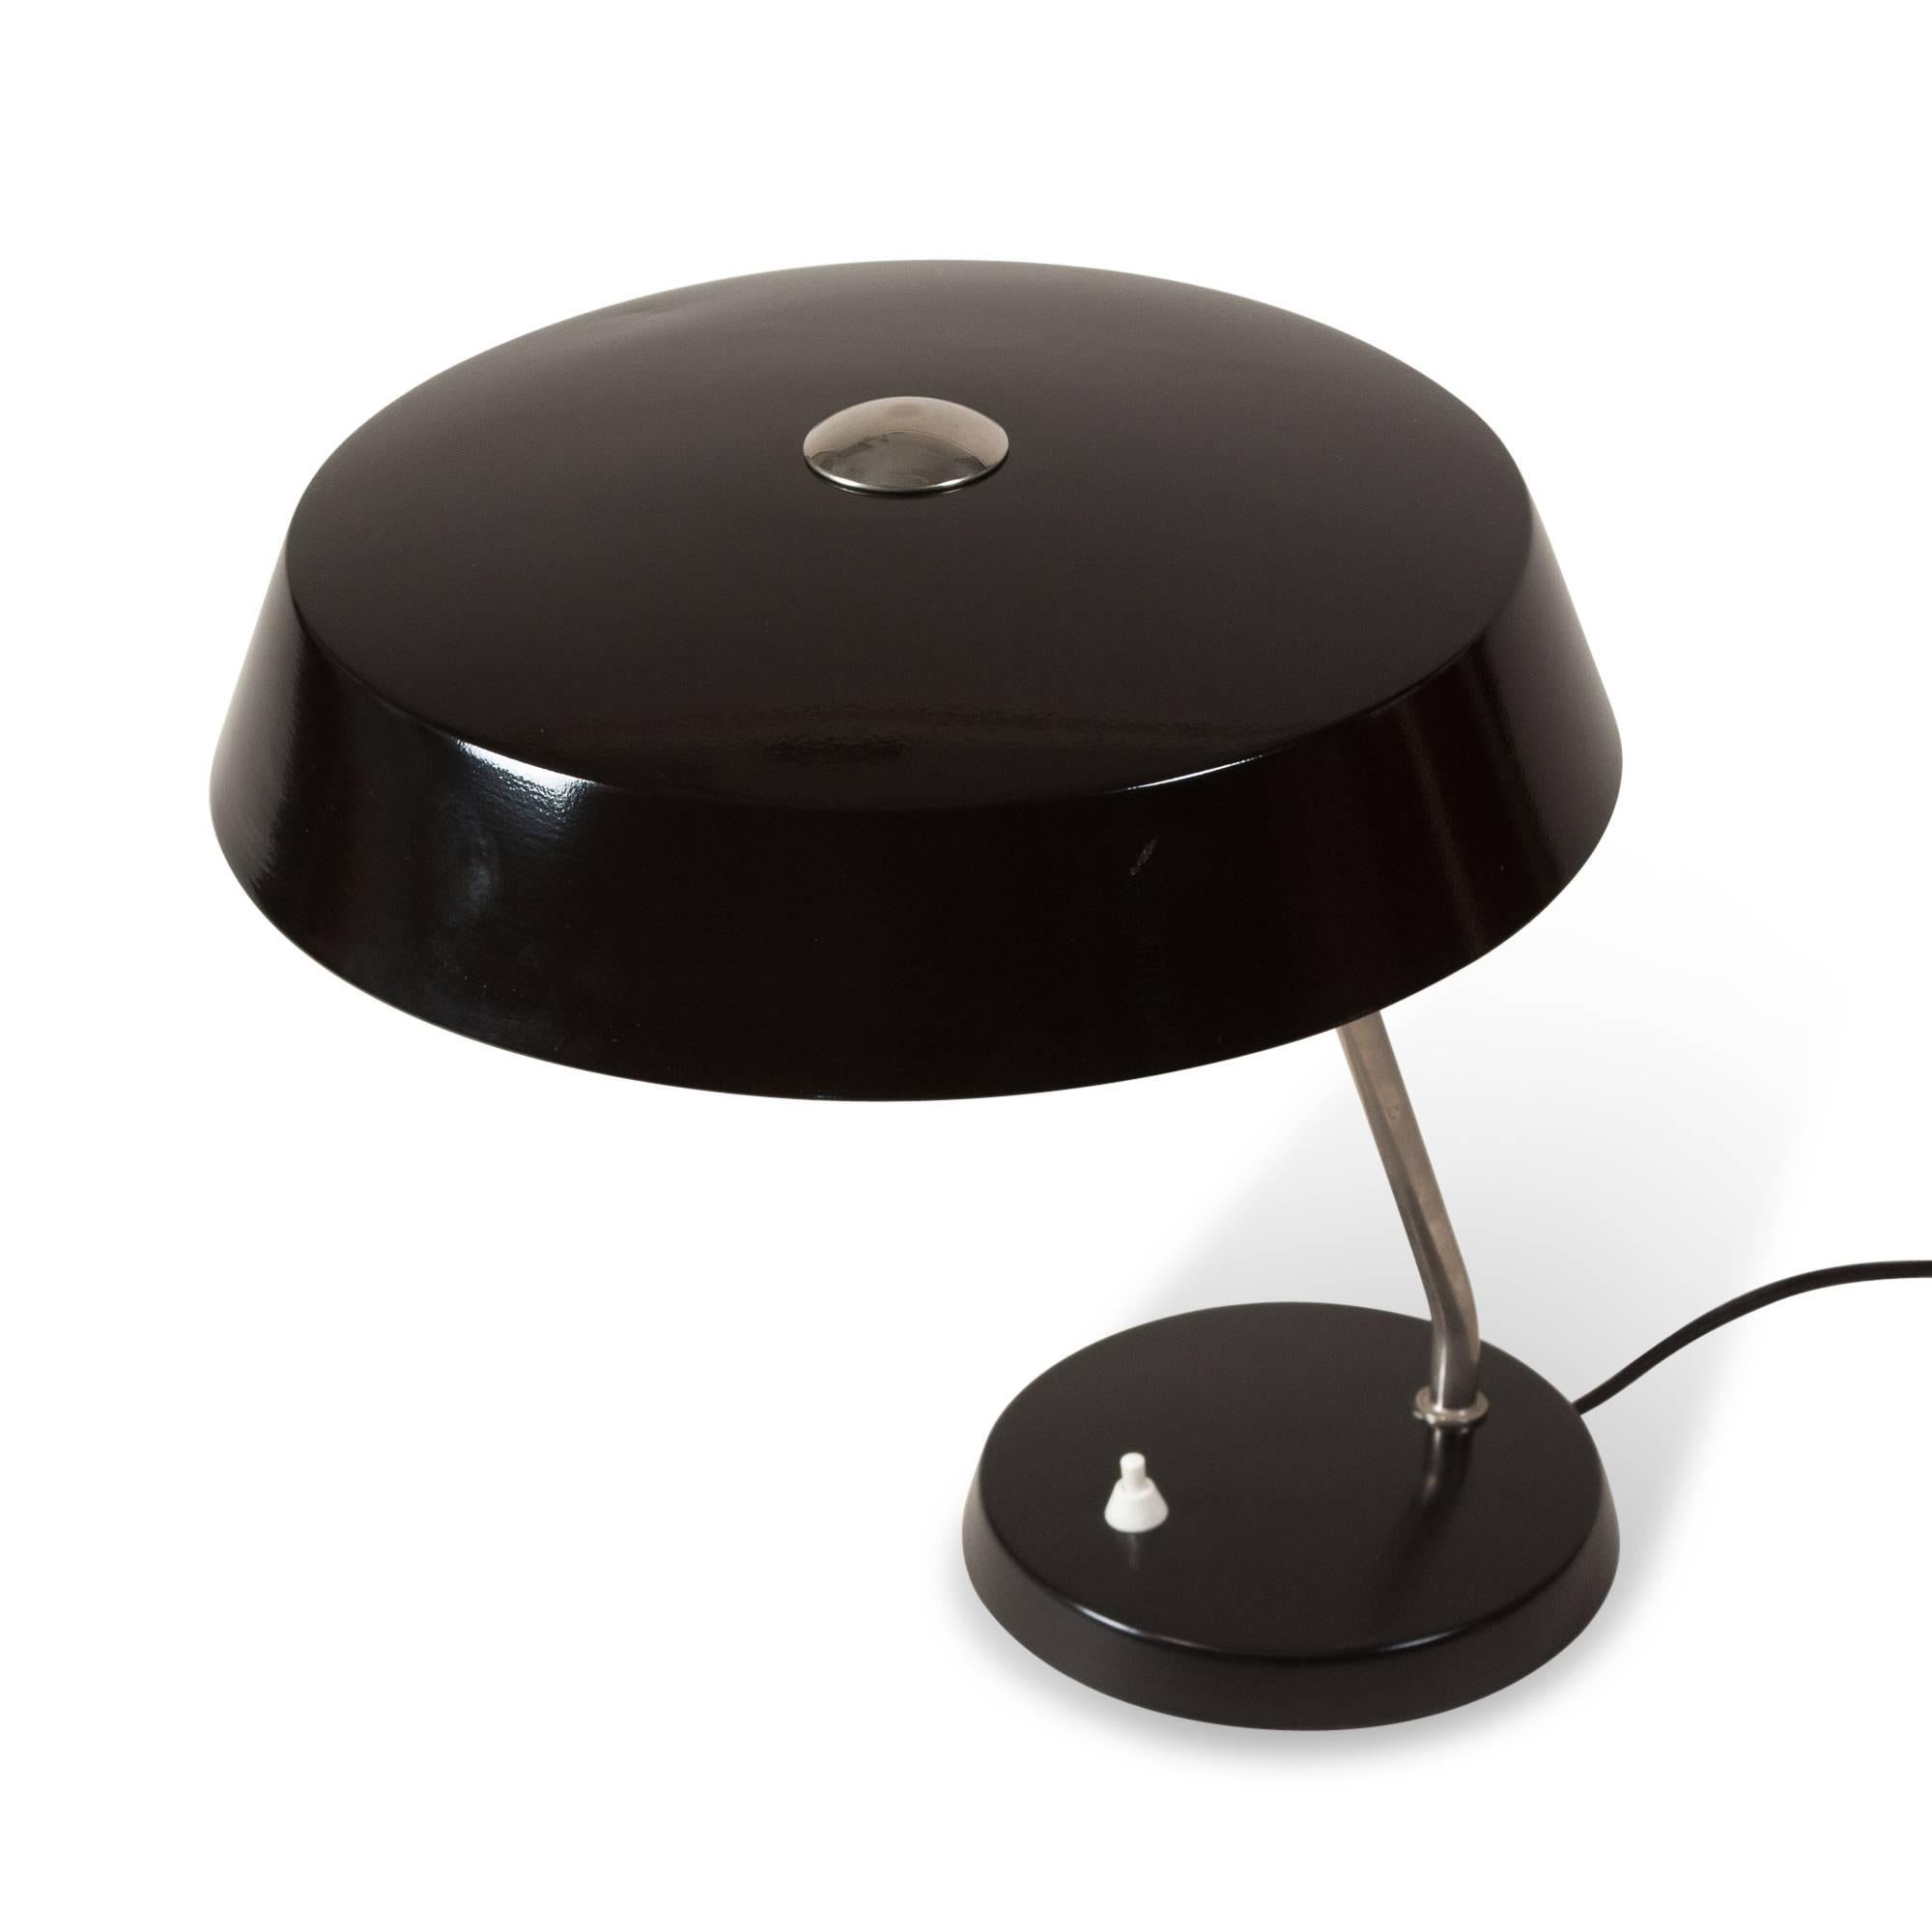 Mid-20th Century Black Lacquered Desk Lamp, German, 1950s